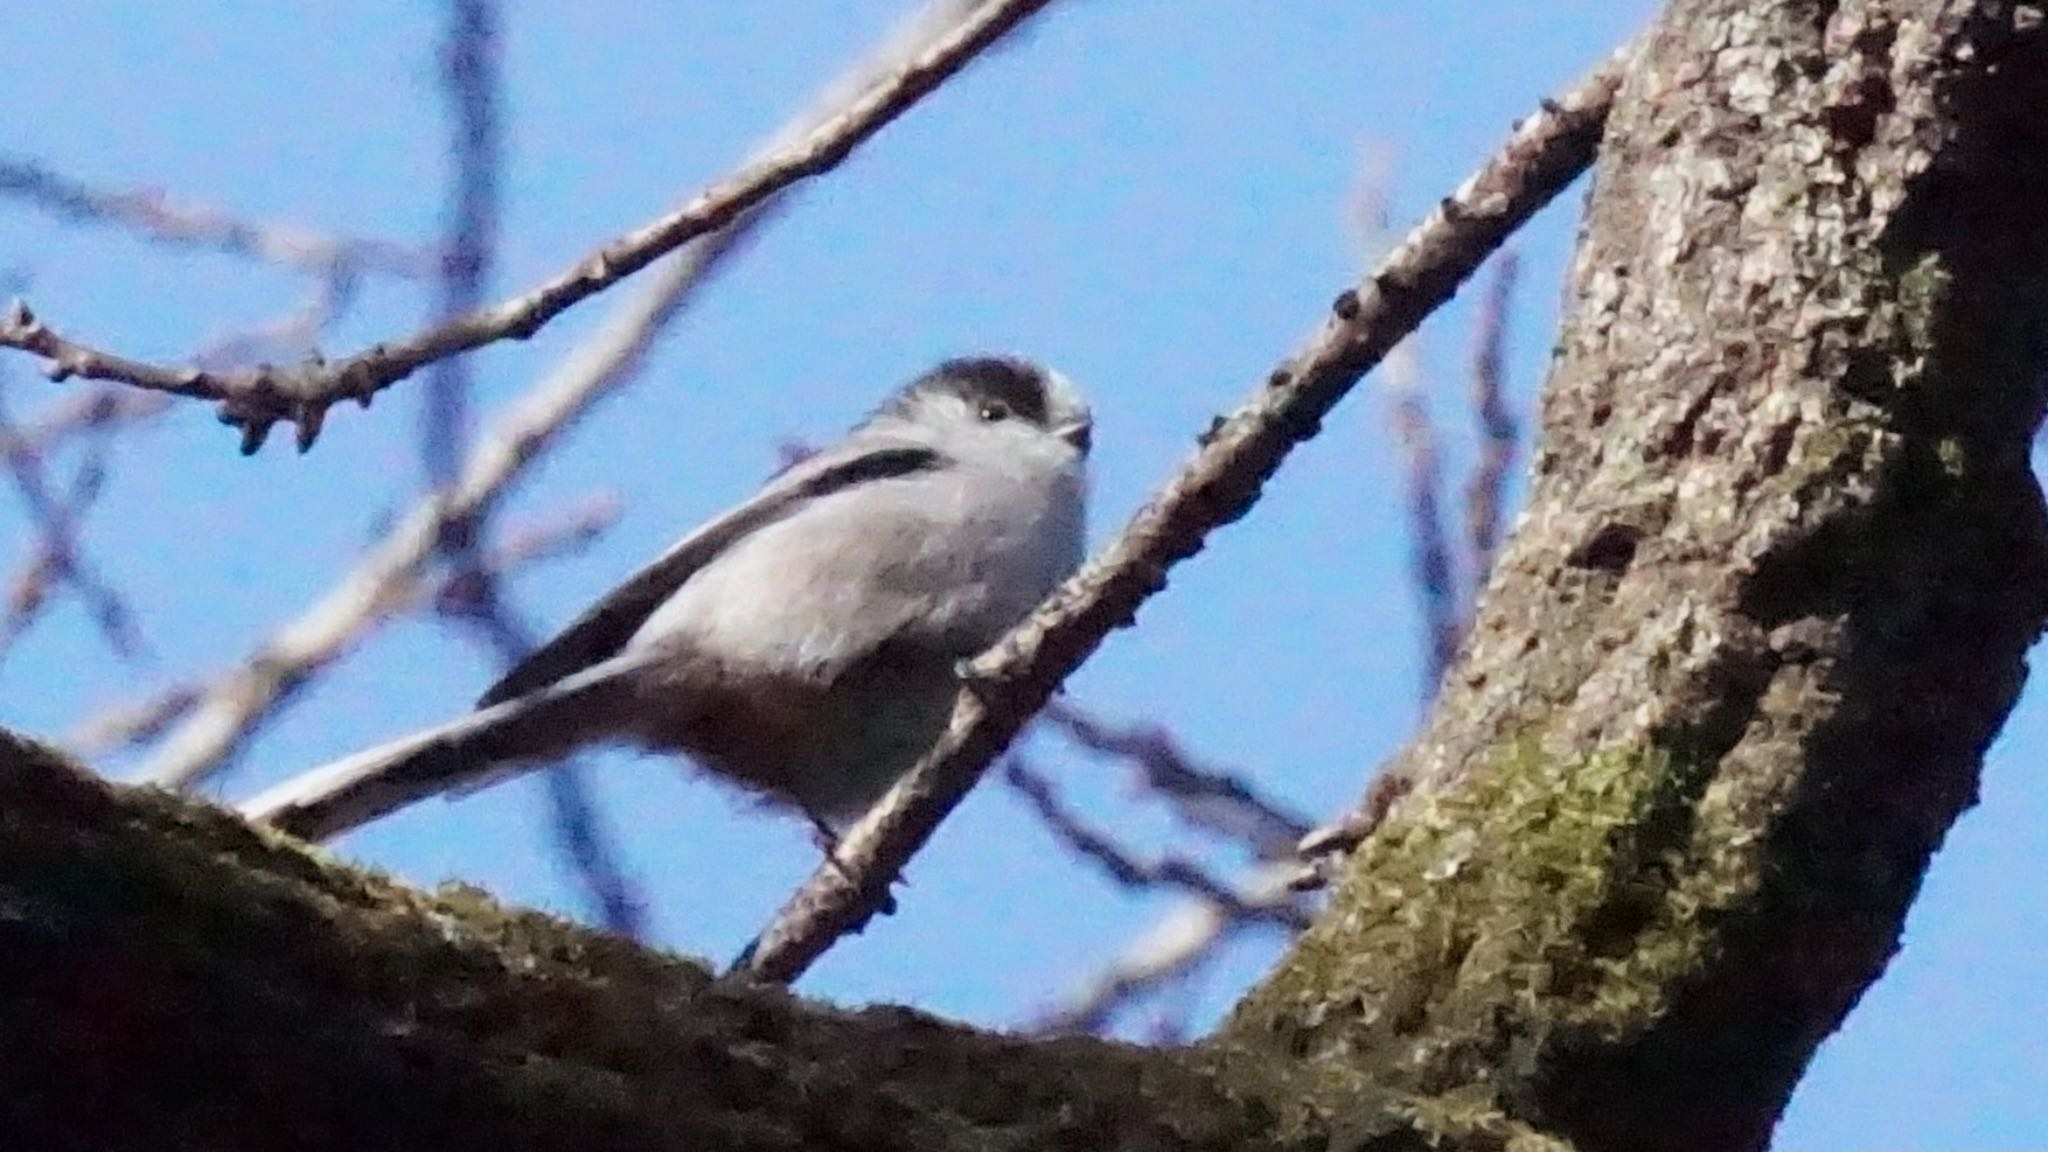 Photo of Long-tailed Tit at Ooaso Wild Bird Forest Park by ツピ太郎